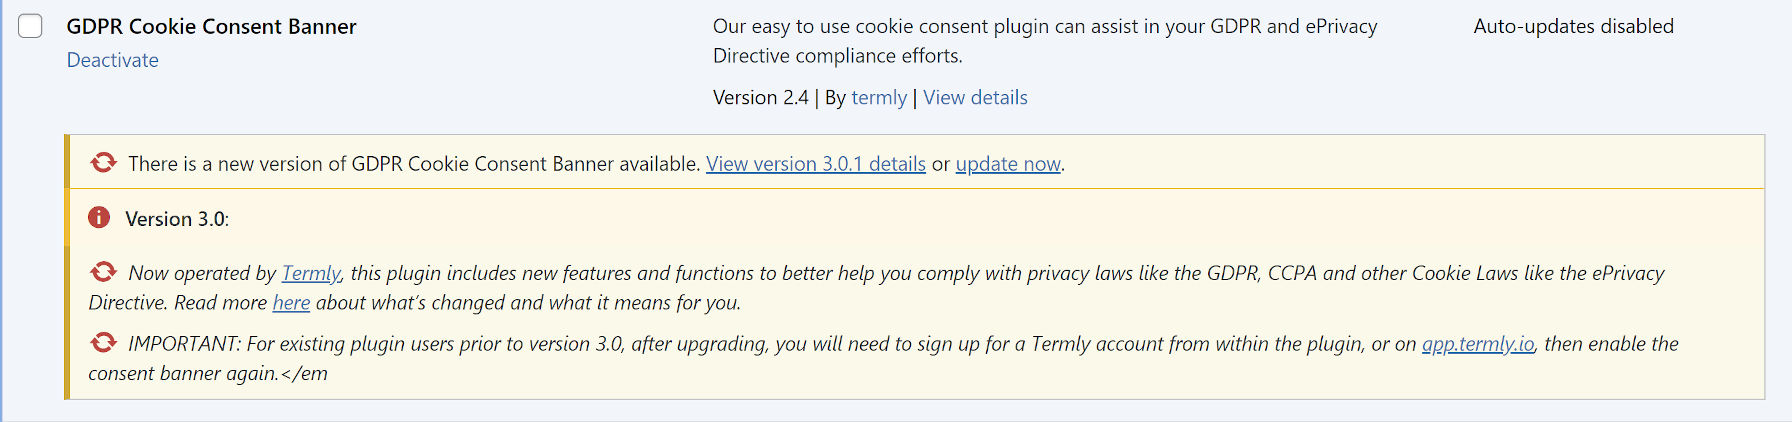 Admin notice from the GDPR Cookie Consent Plugin before upgrading to 3.0.